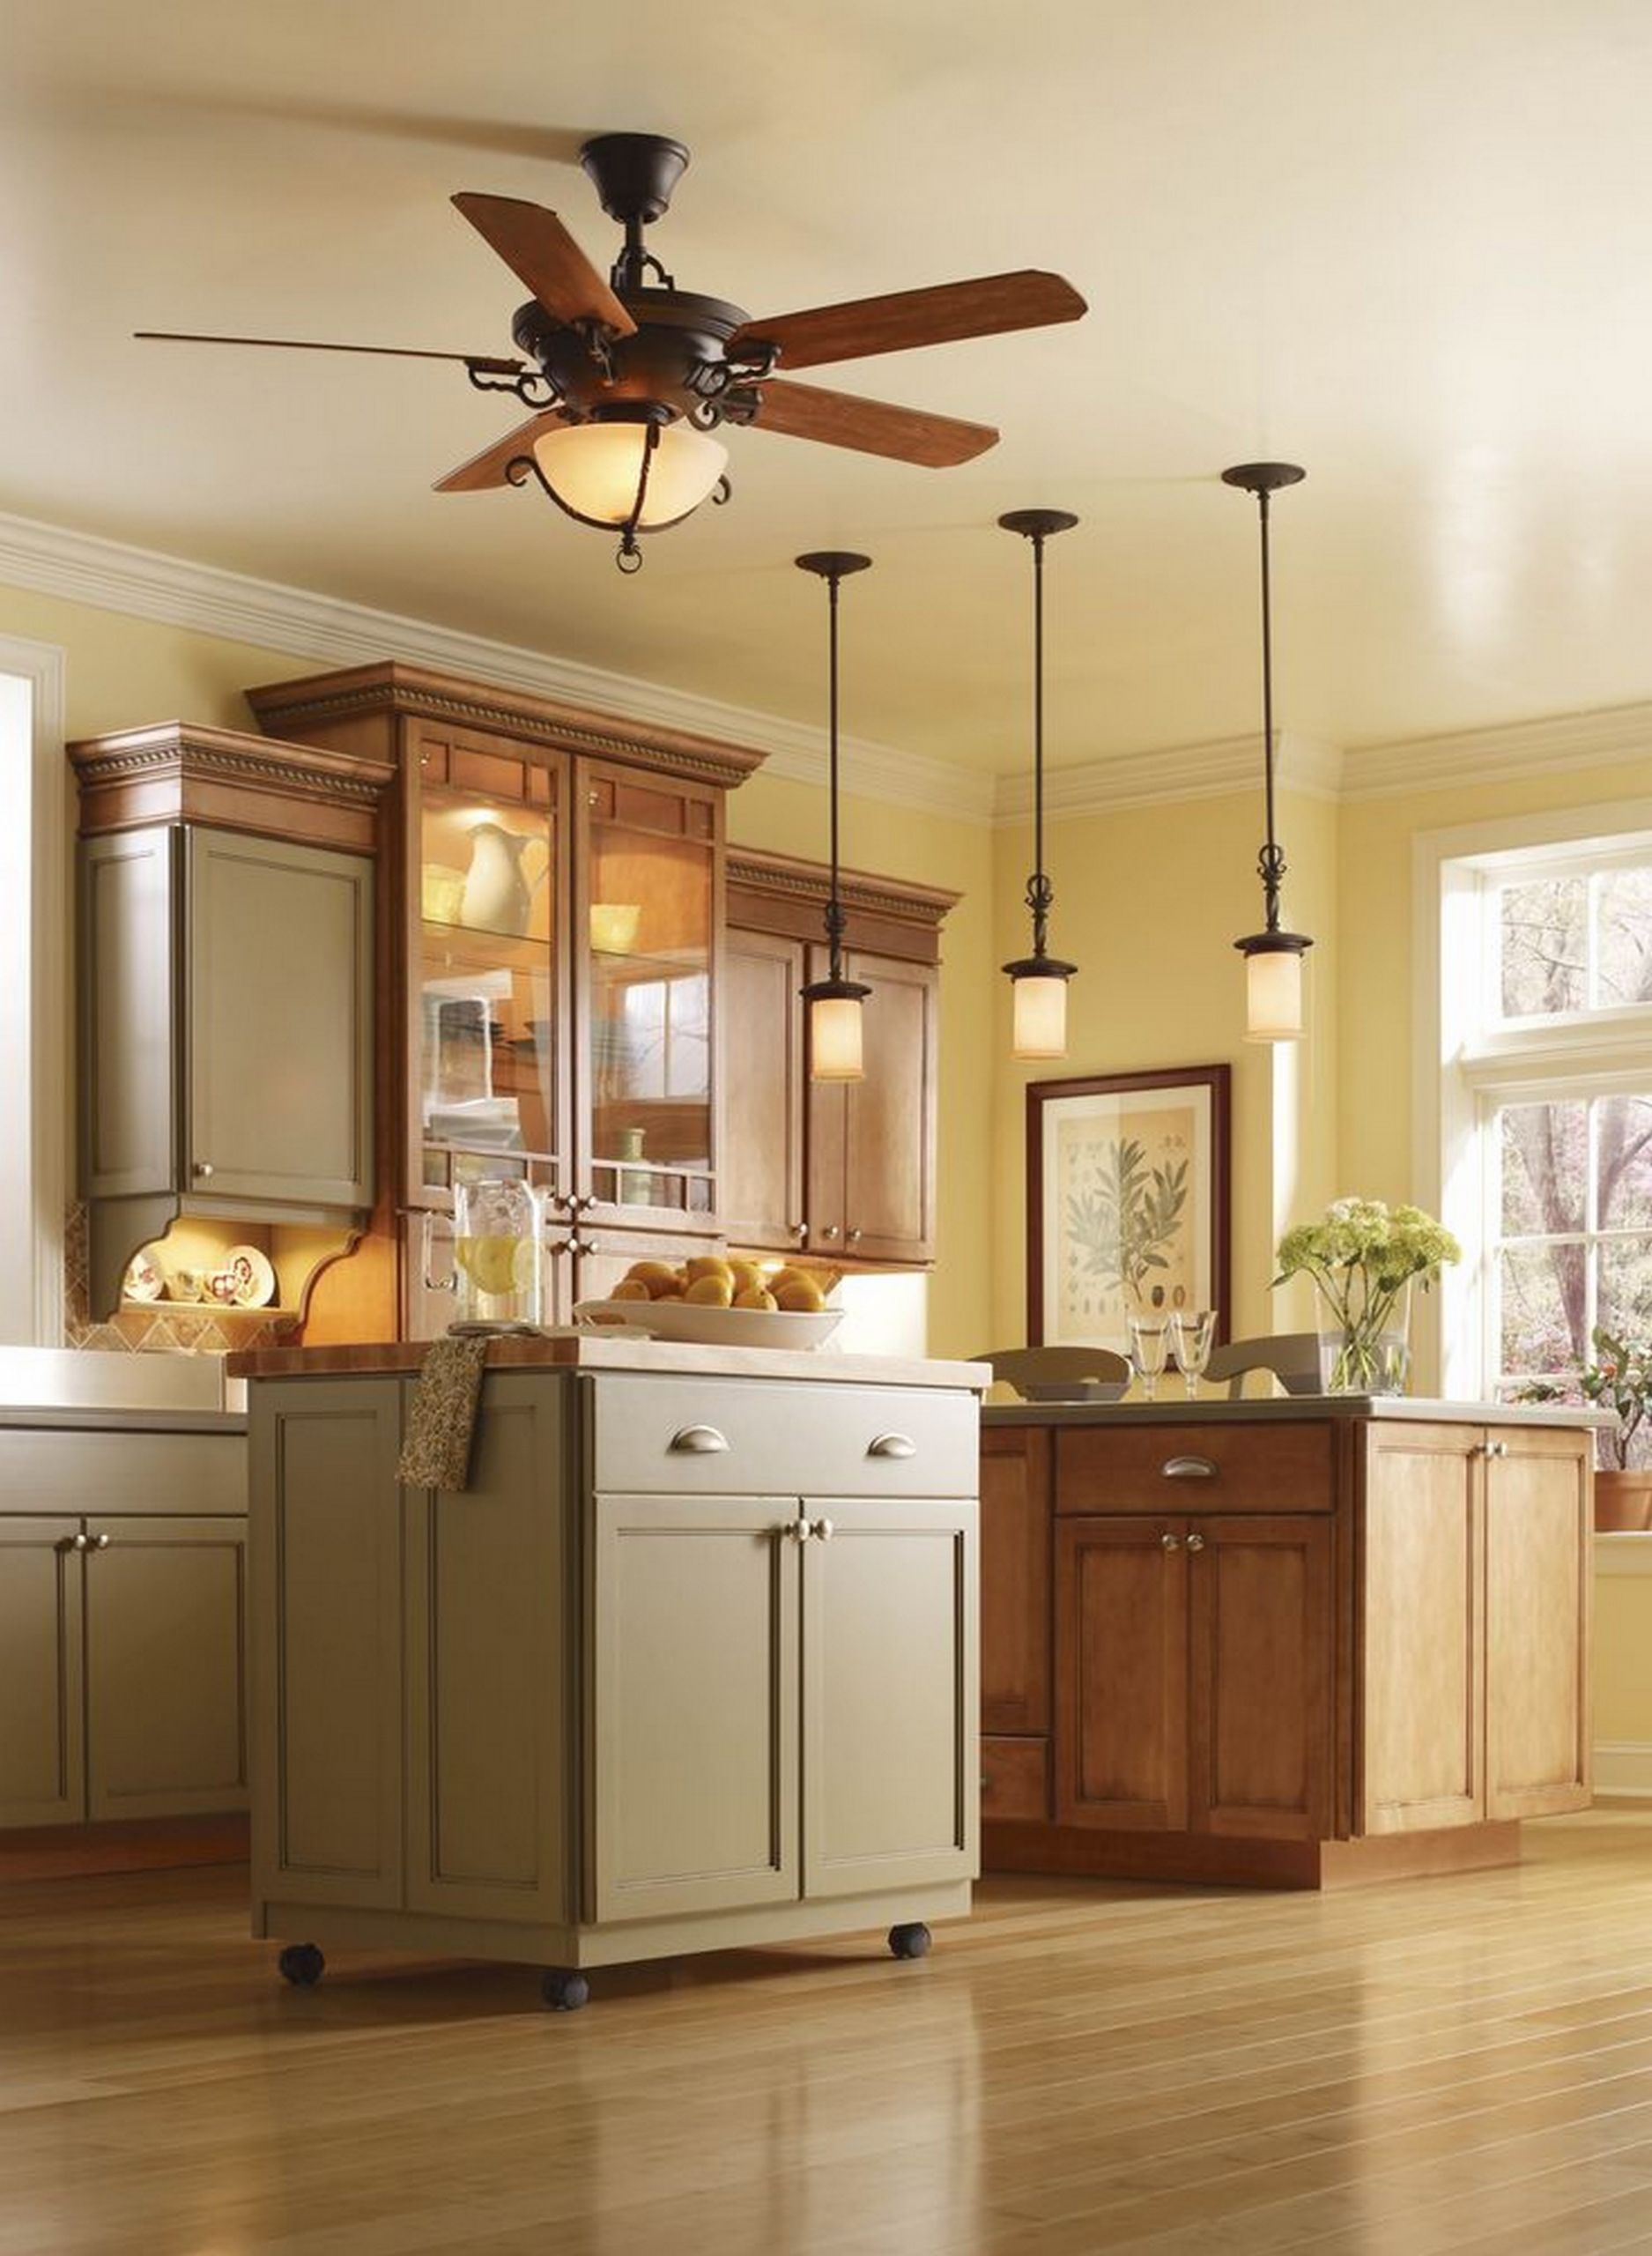 Kitchen Ceiling Fan With Light
 10 Tips To Help You Get the Right Ceiling fan for kitchen